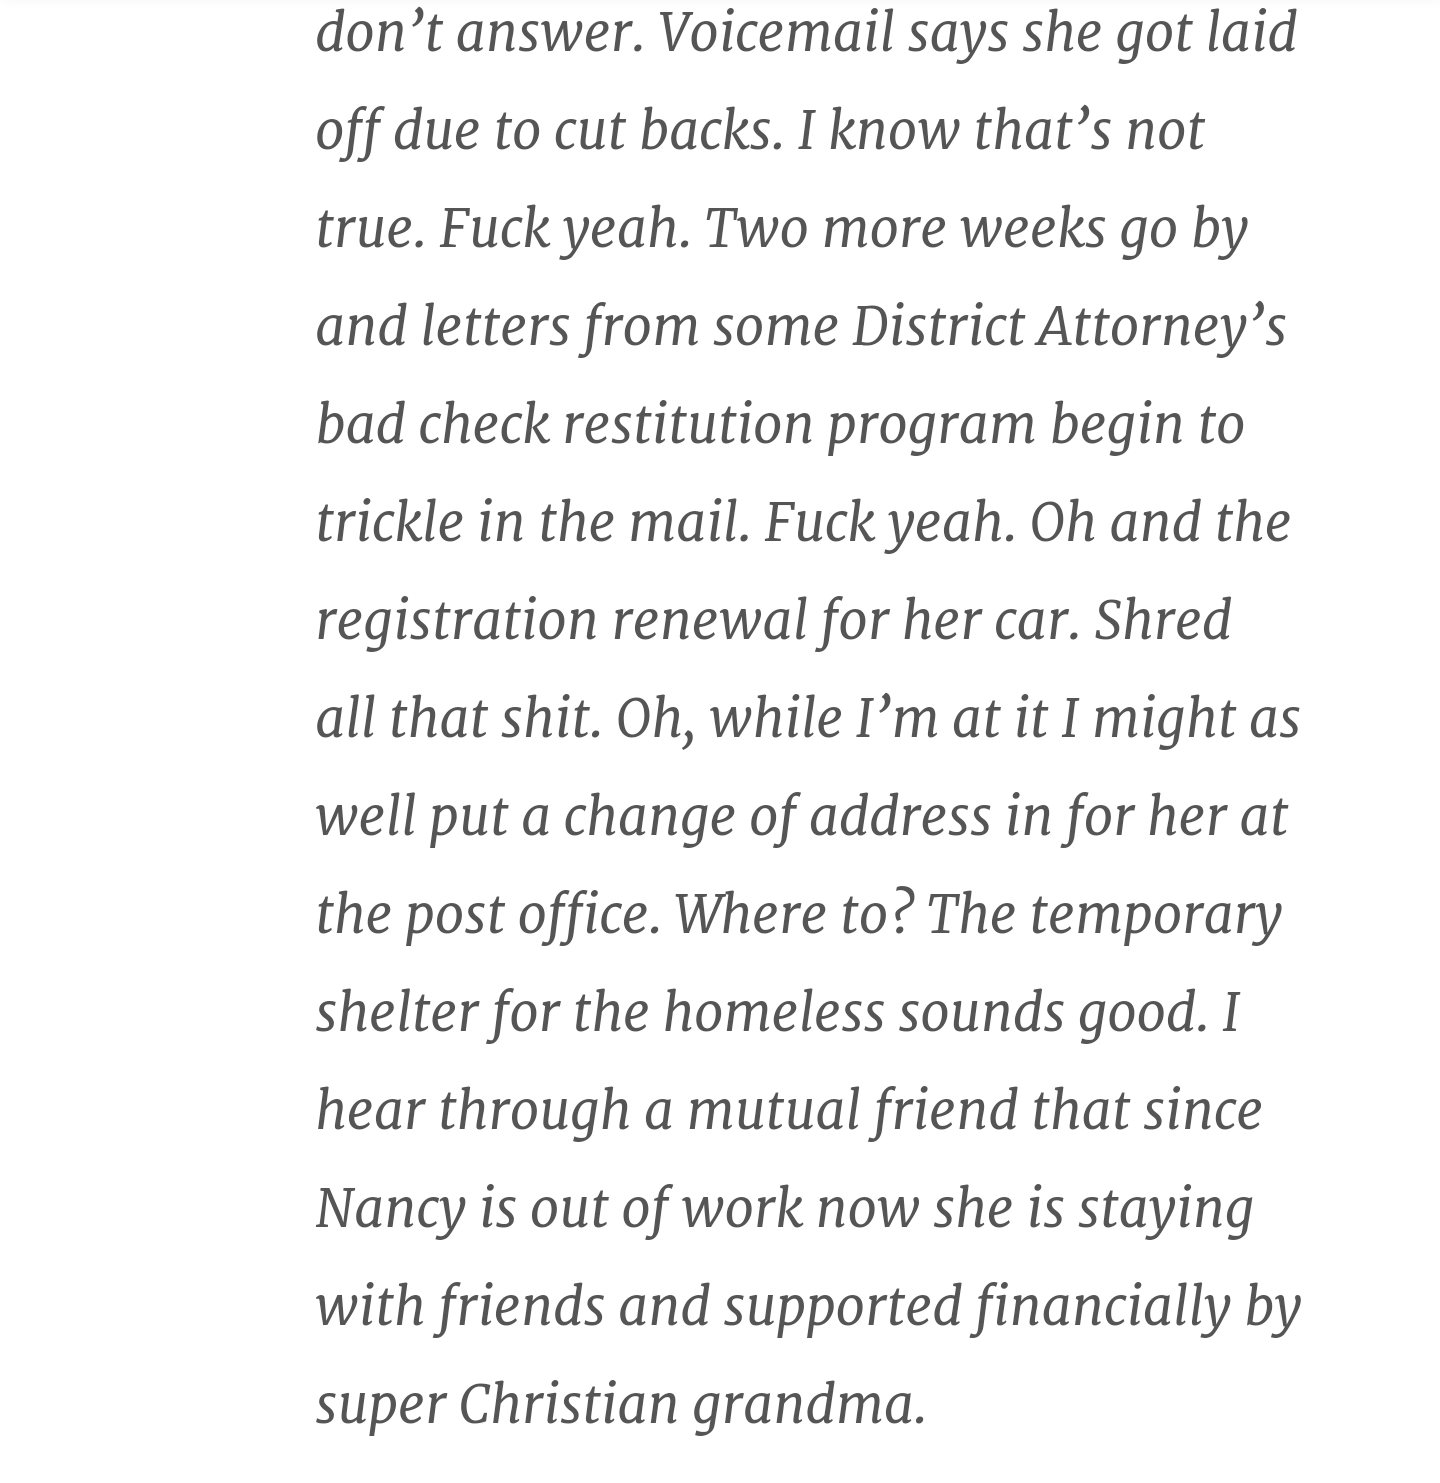 angle - don't answer. Voicemail says she got laid off due to cut backs. I know that's not true. Fuck yeah. Two more weeks go by and letters from some District Attorney's bad check restitution program begin to trickle in the mail. Fuck yeah. Oh and the reg